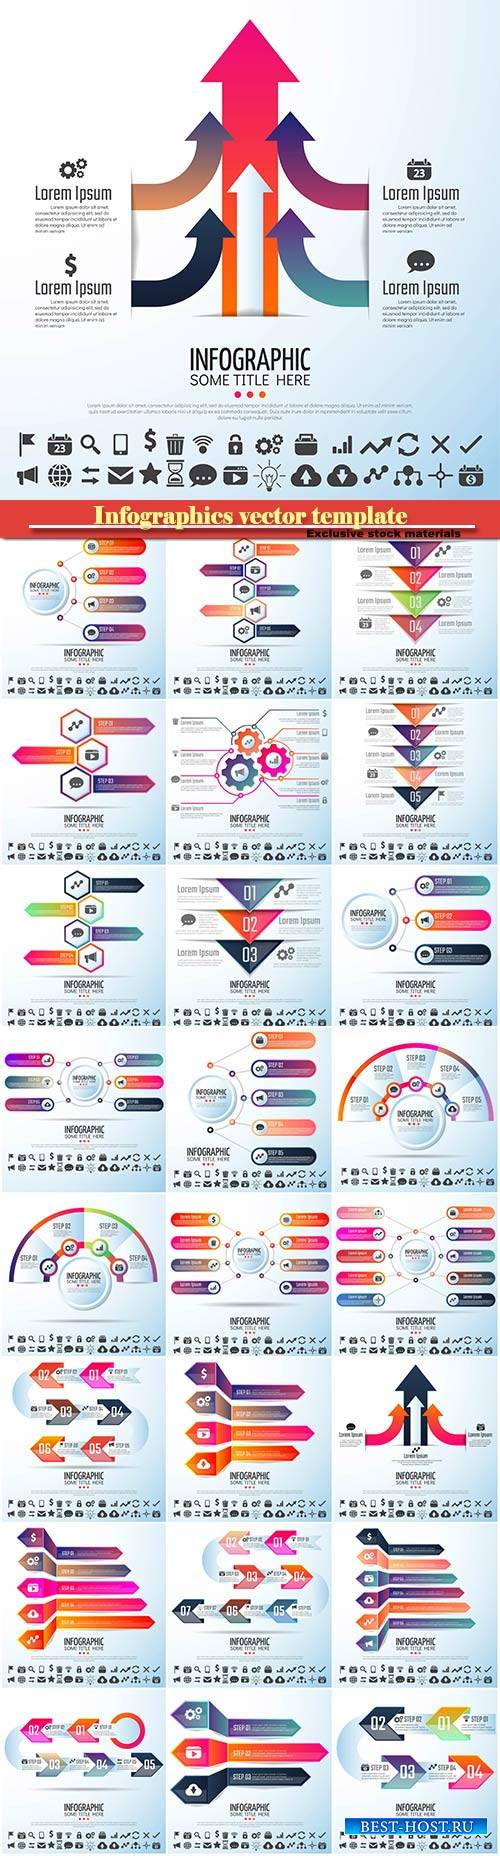 Infographics vector template for business presentations or information banner # 4